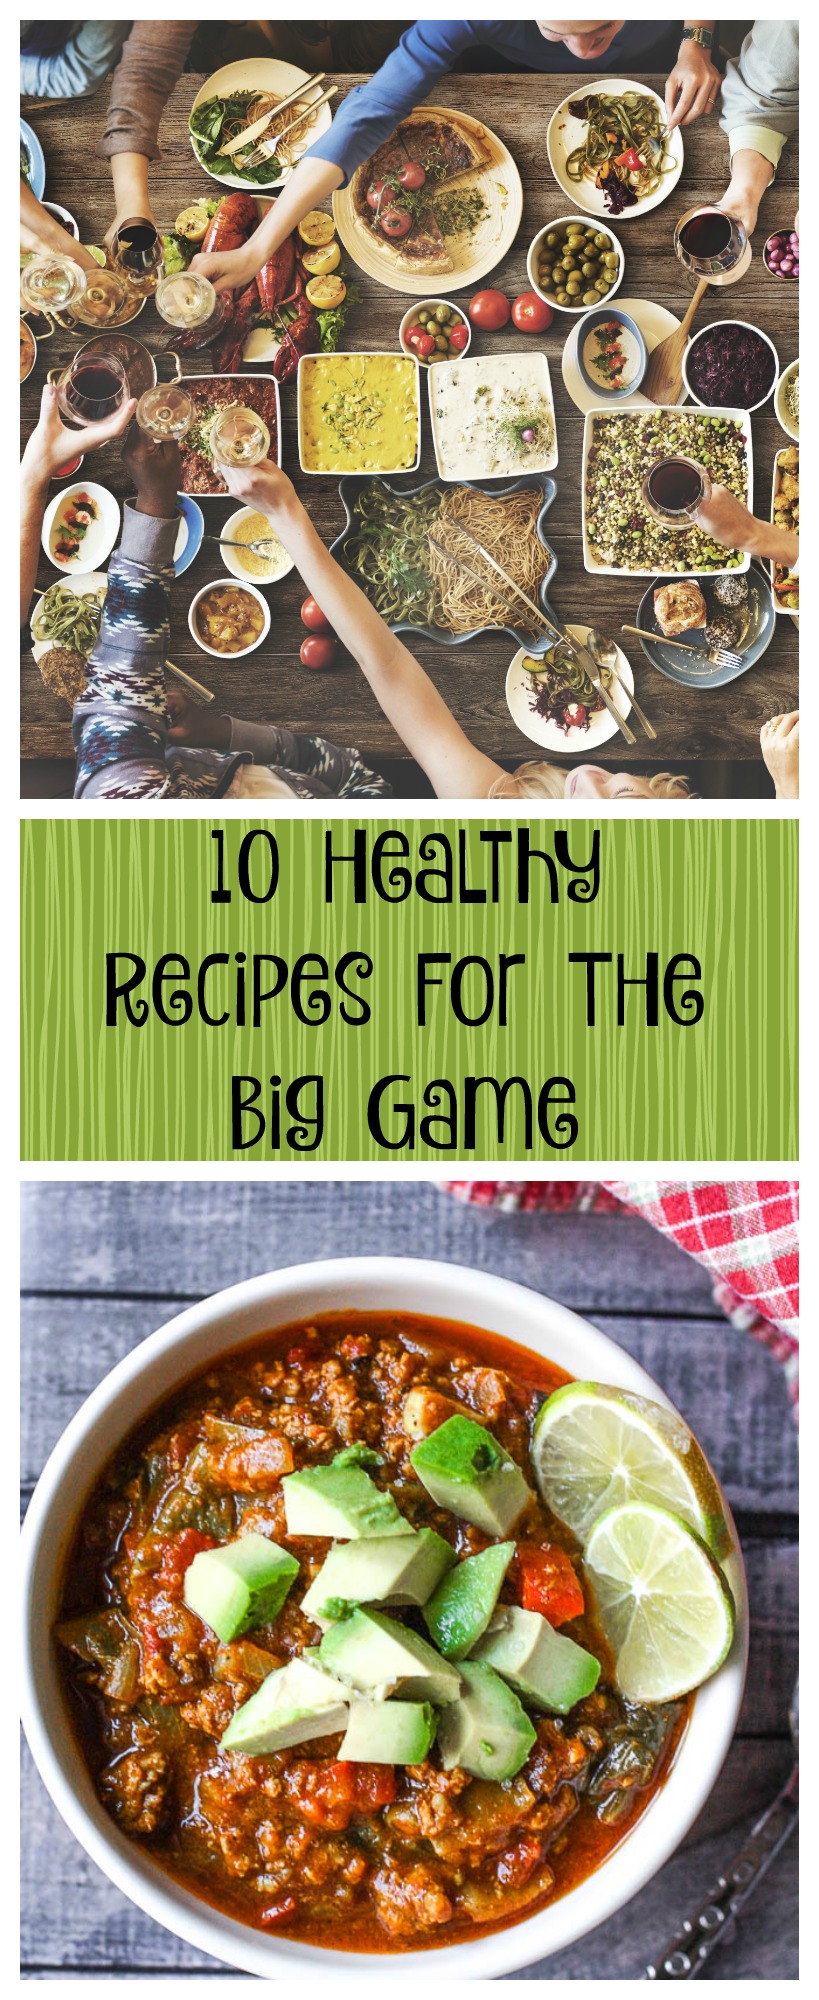 10 healthy recipes for the big game